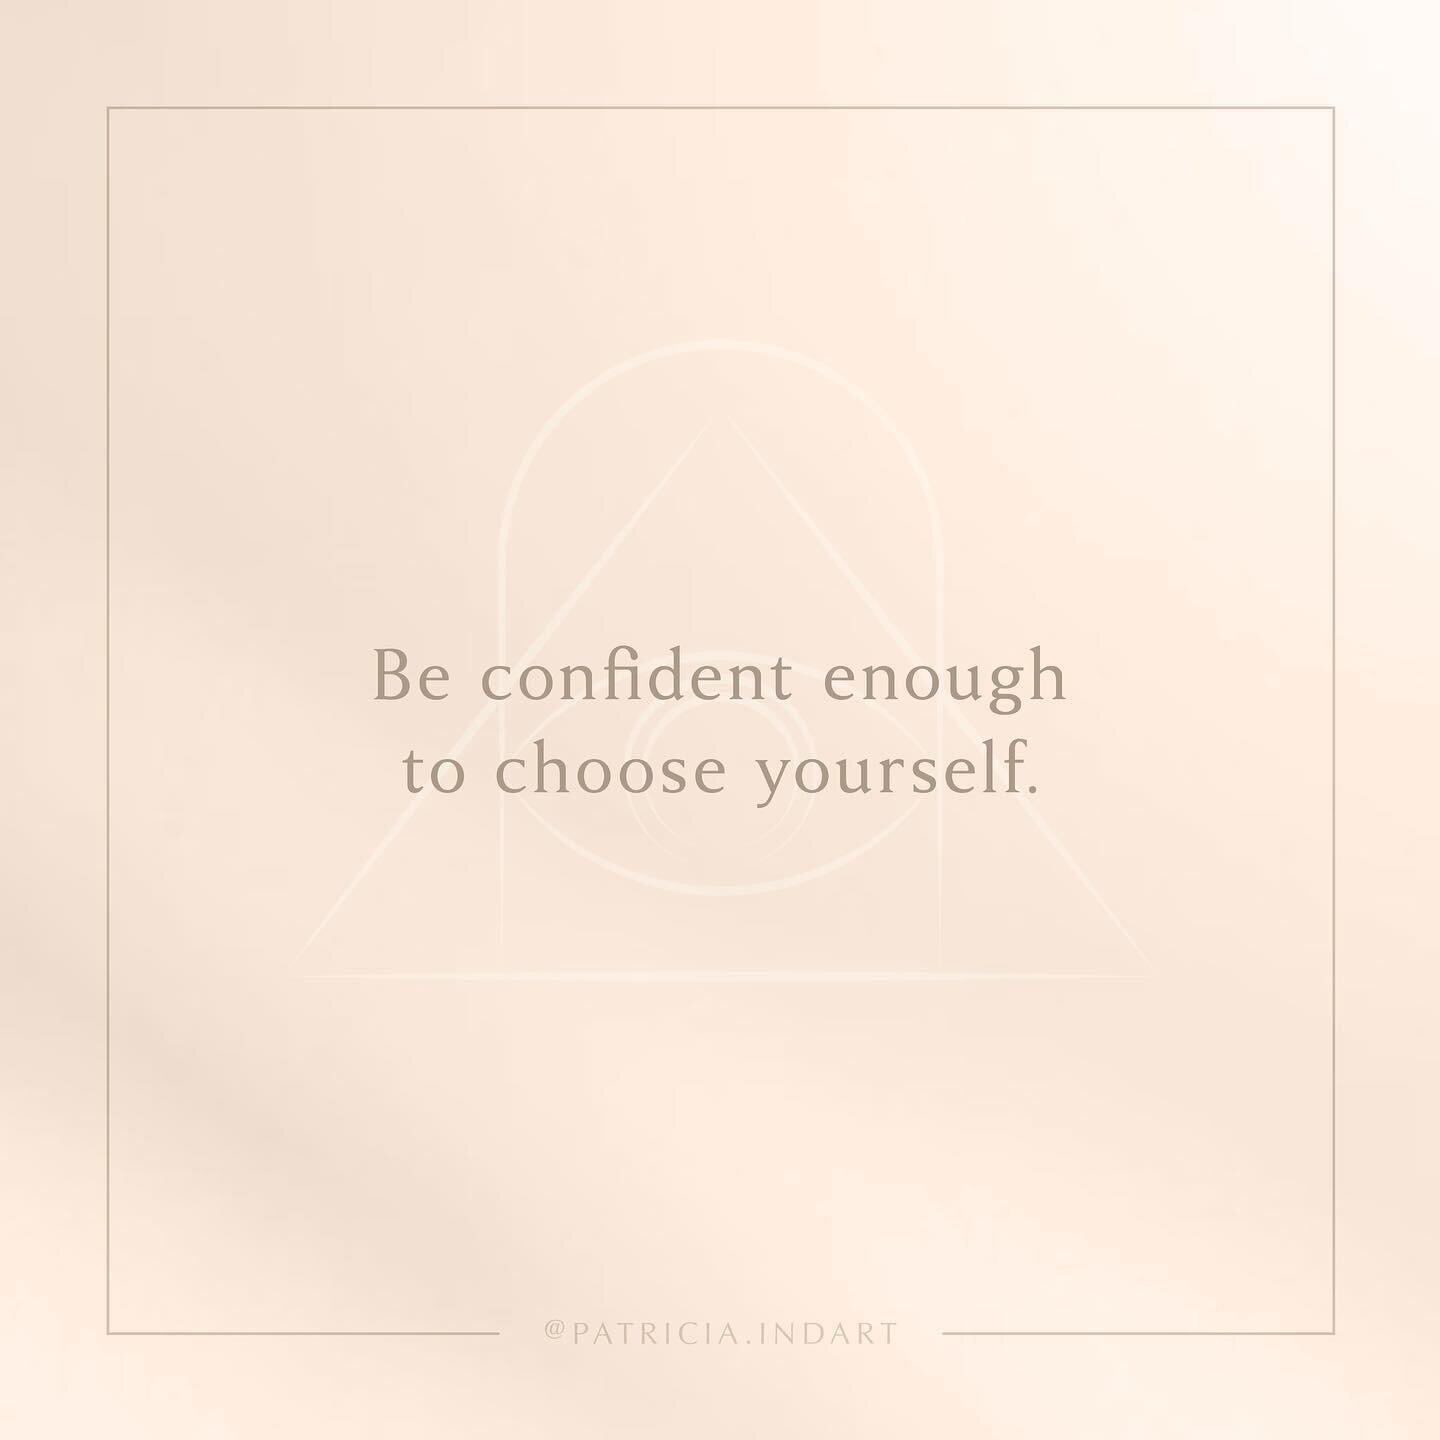 You are enough. You are deserving. You are powerful. You are a gift. Be confident enough to honour yourself, create the life you want, and share your gifts with the world. 💫